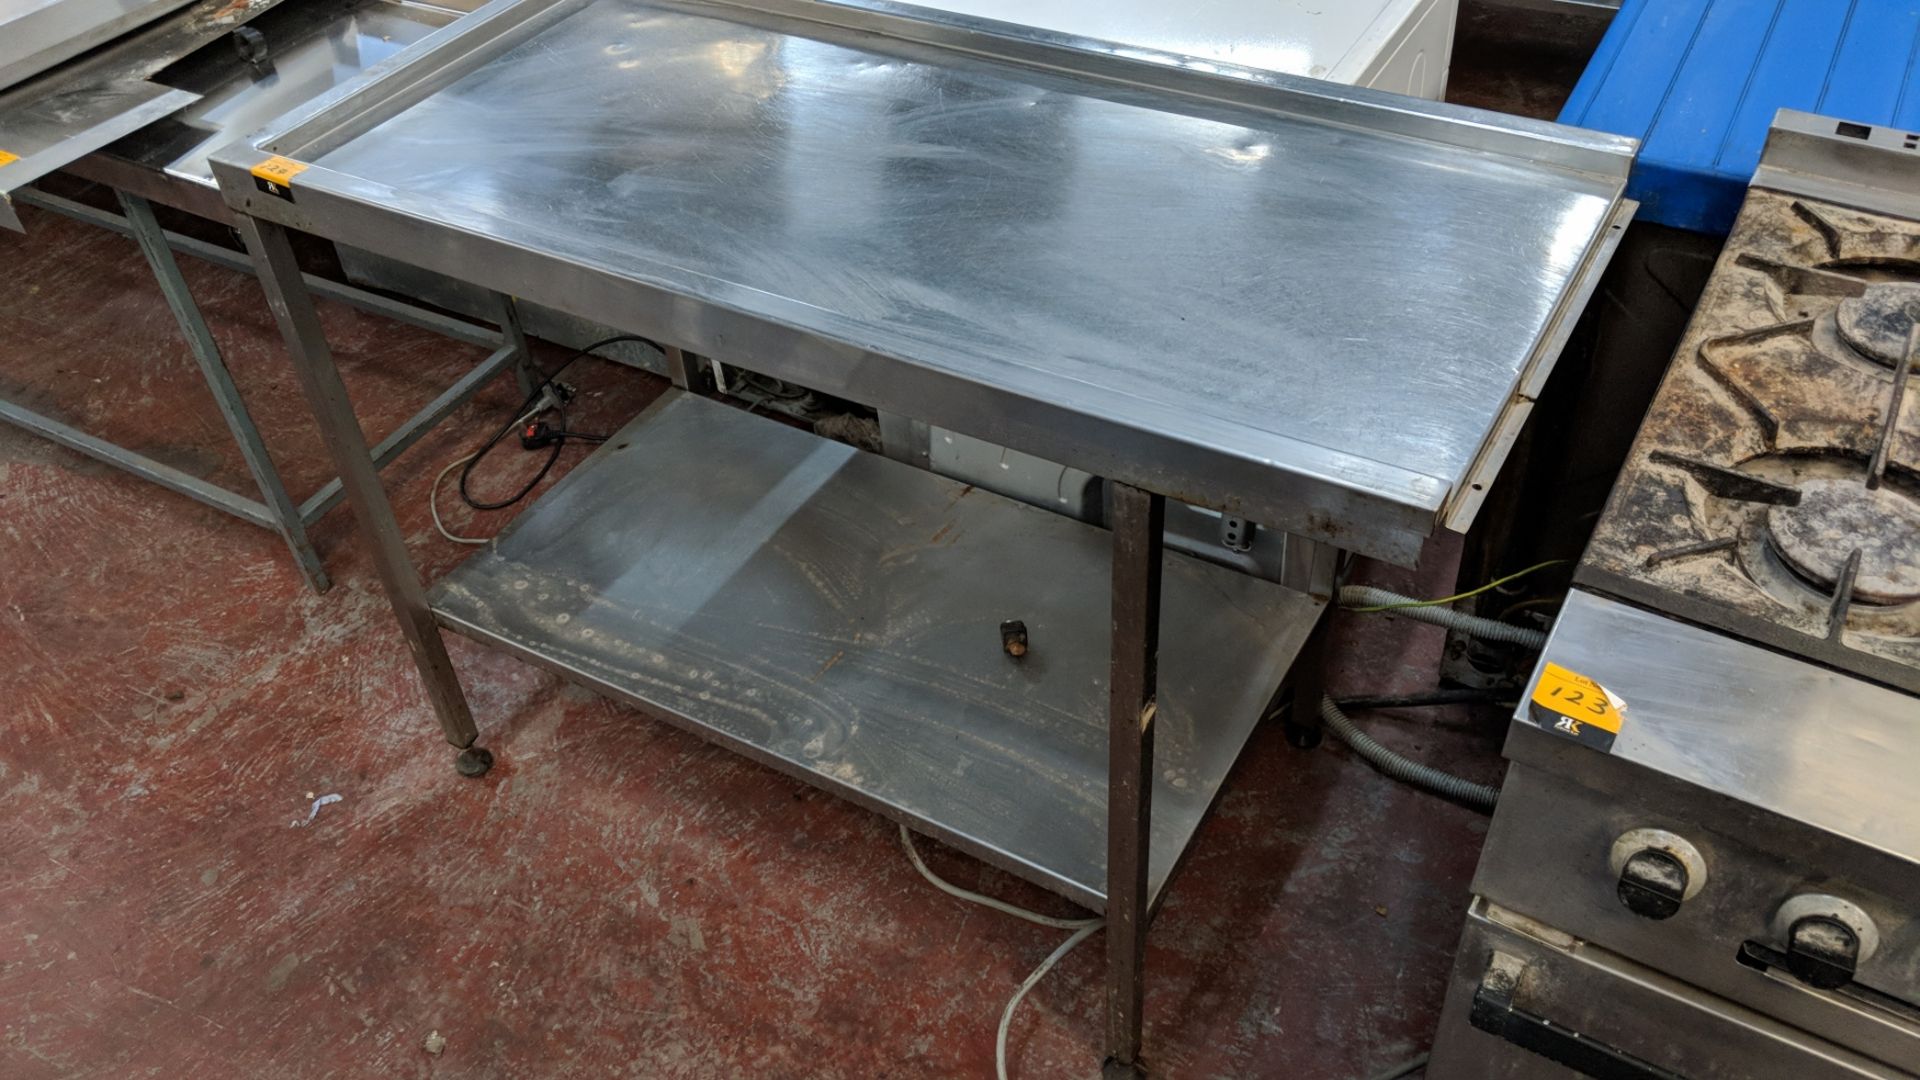 Stainless steel twin tier table for use with commercial dishwasher, top section being circa 1200mm